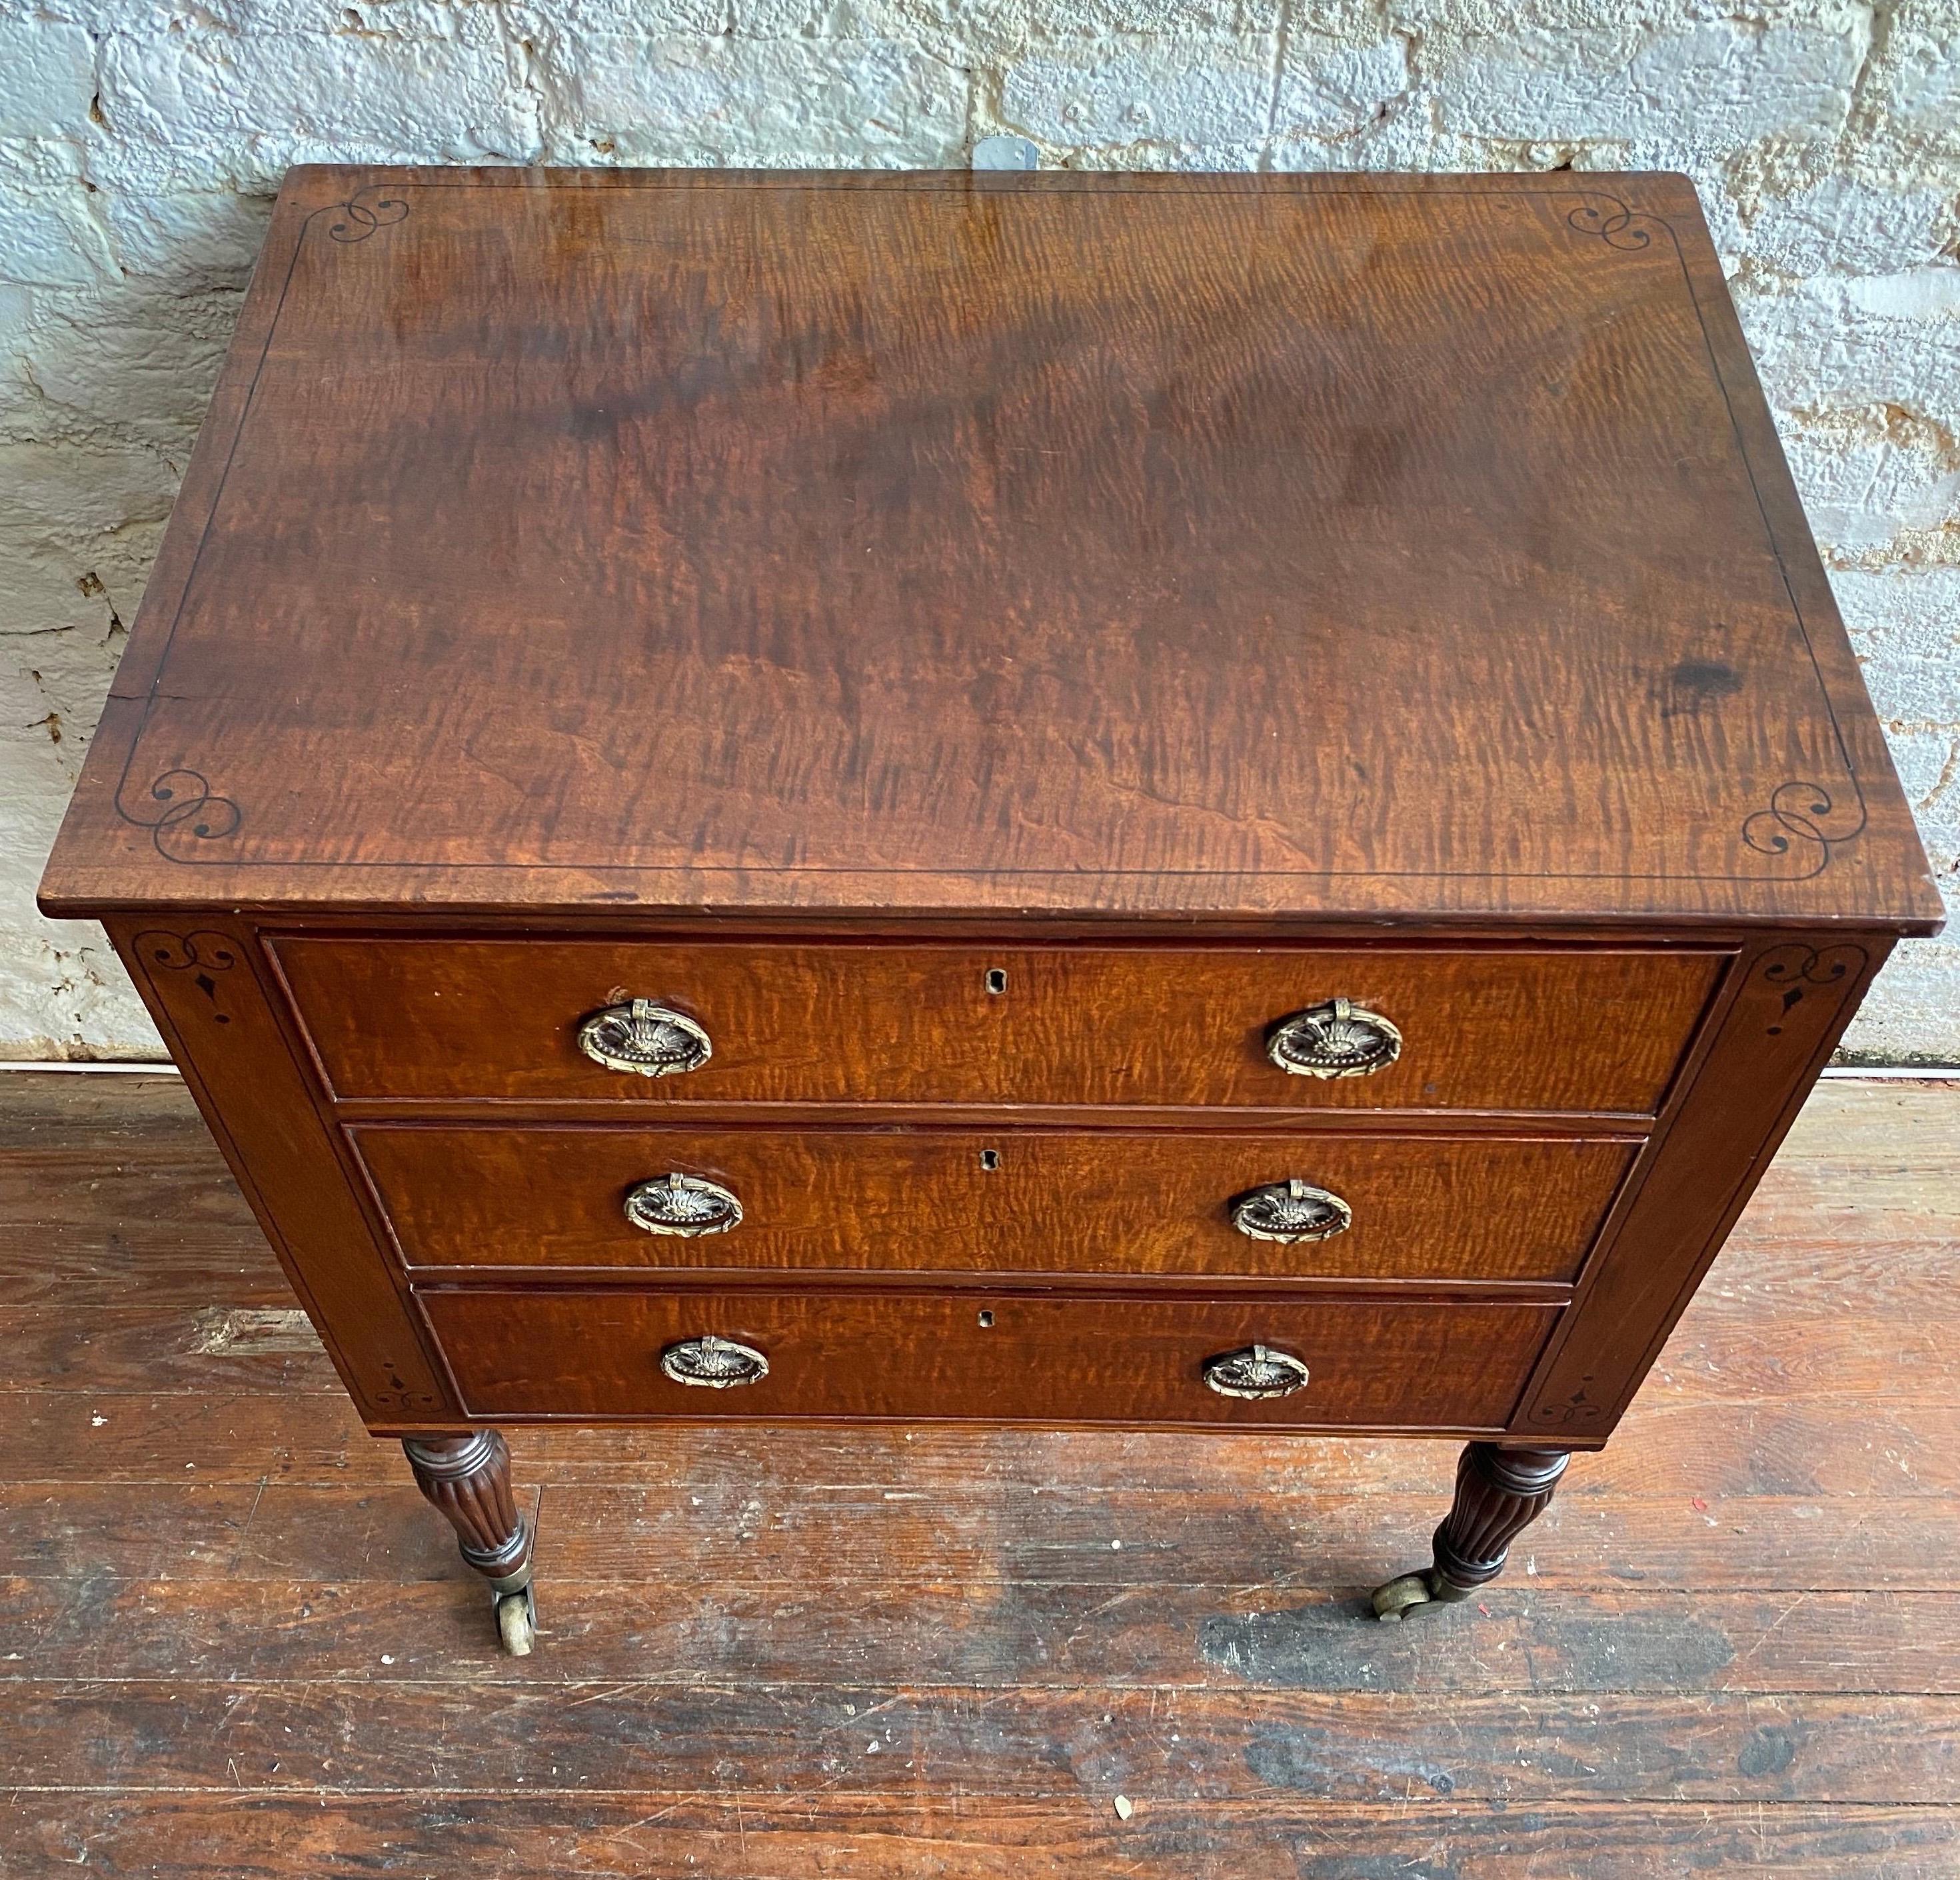 19th Century Regency Ebony Inlaid Fiddleback Mahogany 3-Drawer Chest In Good Condition For Sale In Charleston, SC